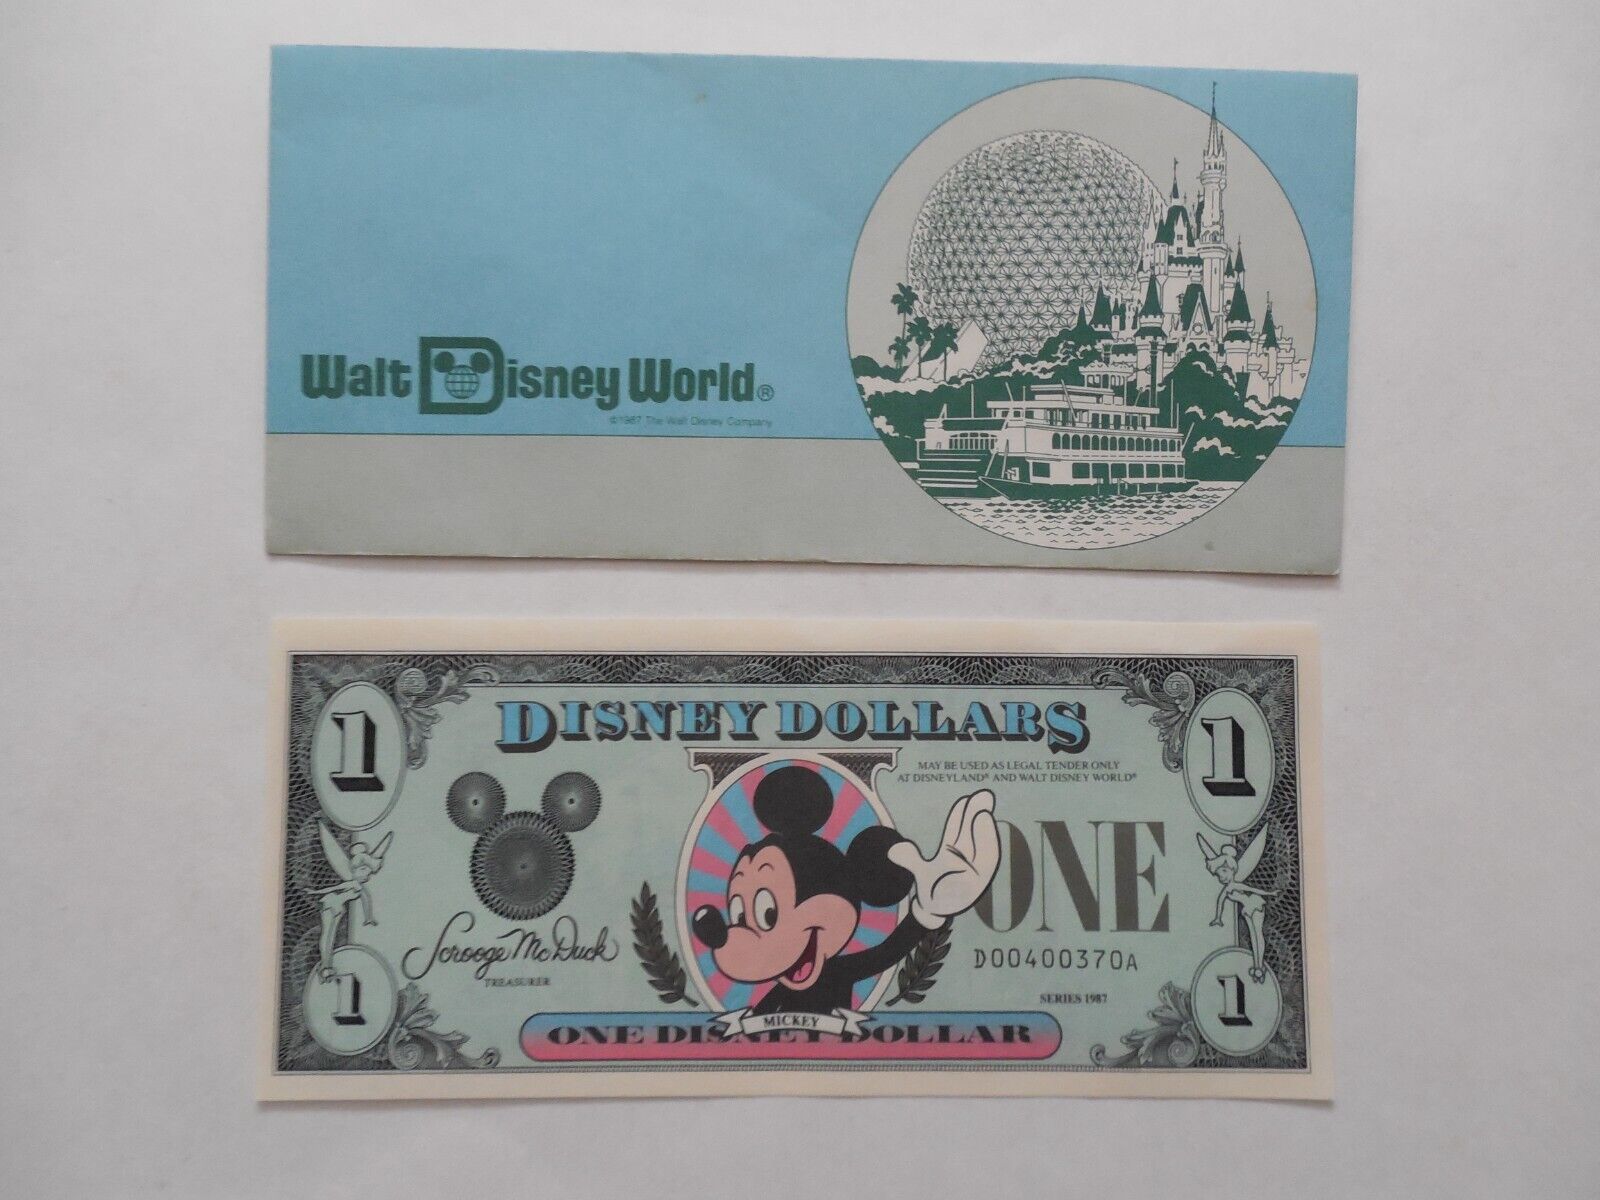 1987 $1 One Disney Dollar Bill Uncirculated Mickey Mouse D00400370A + Envelope